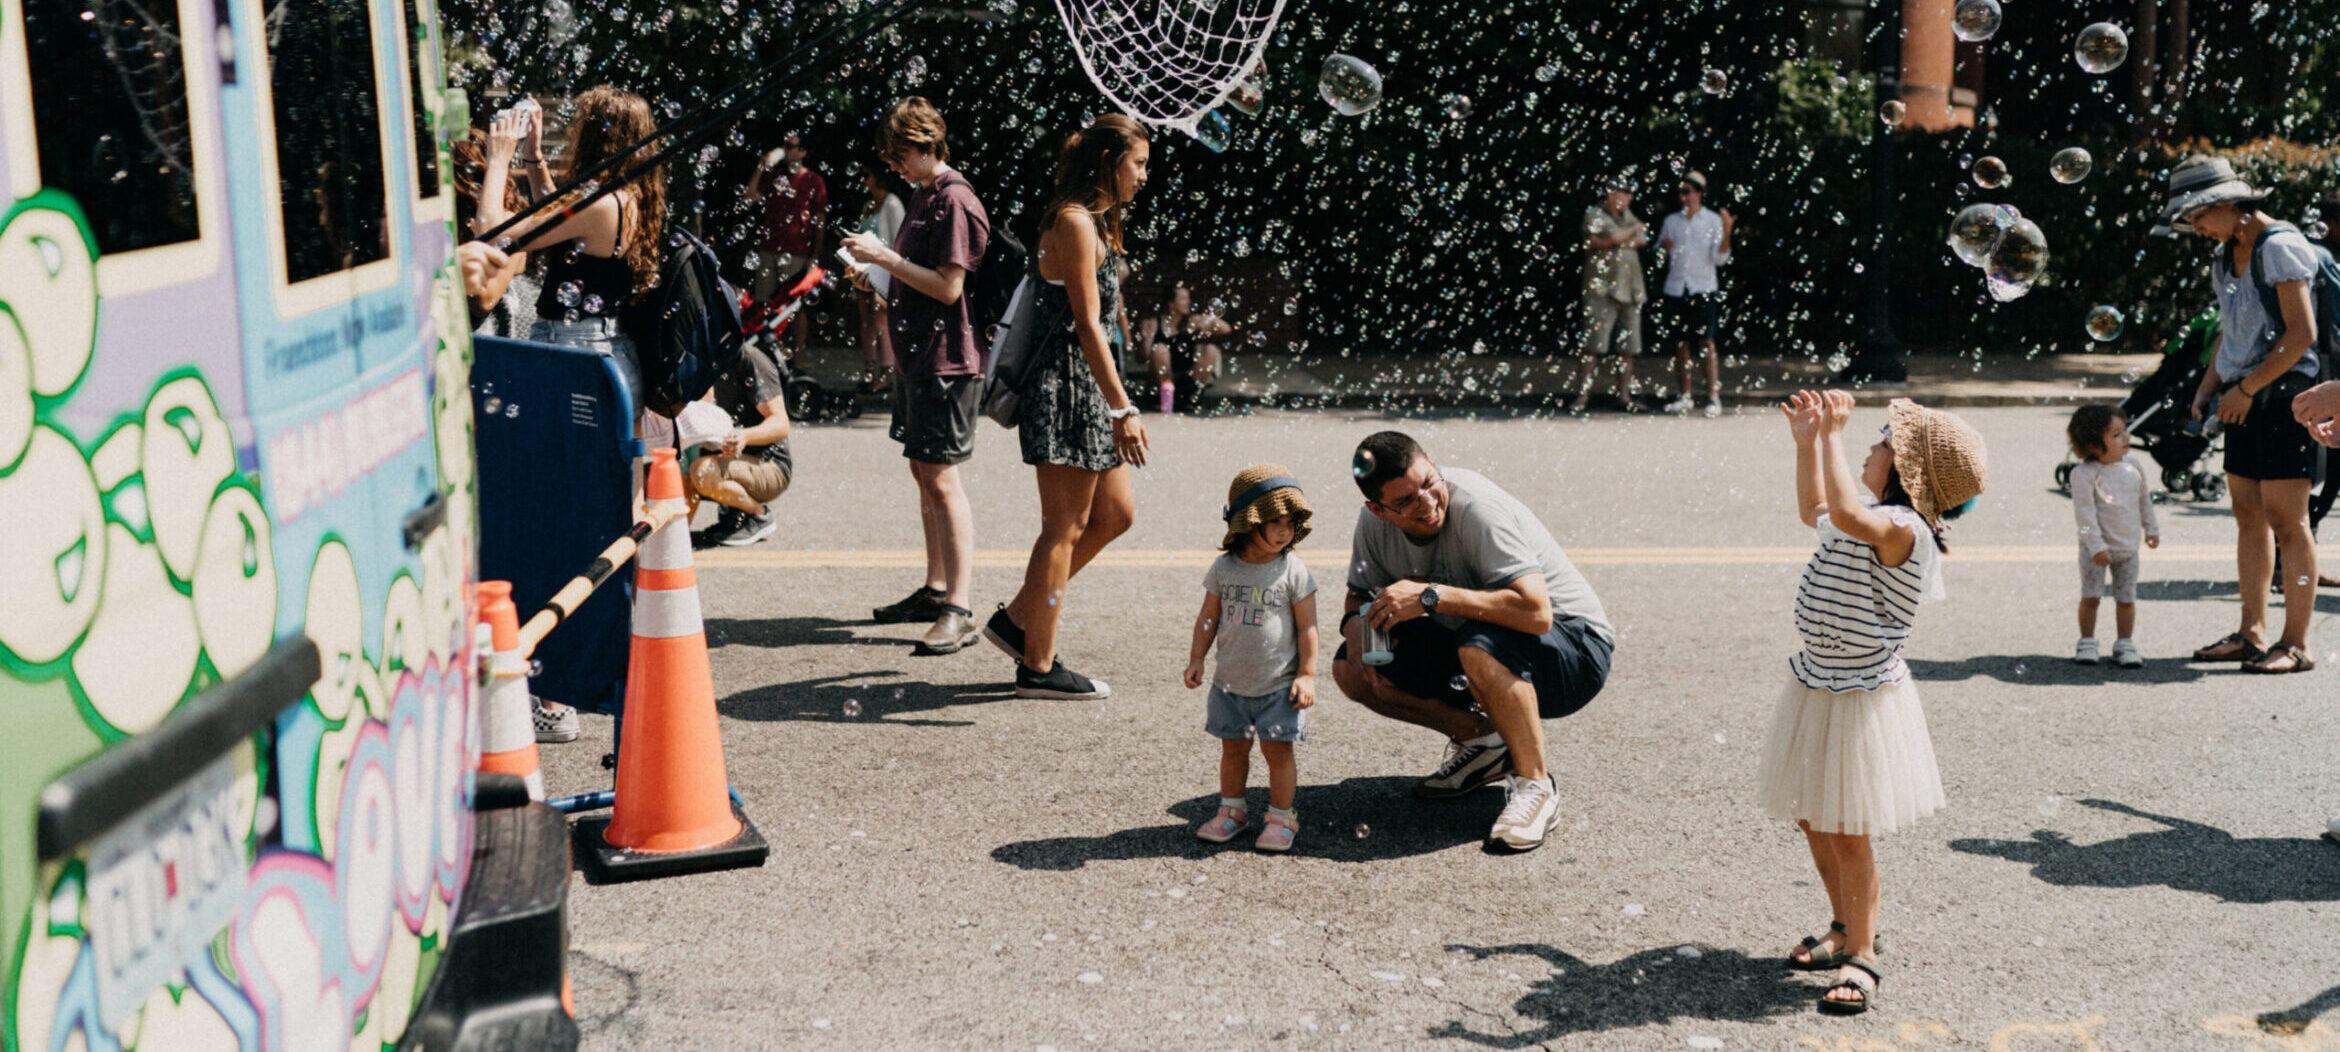 Little girl and family playing in bubbles from a bubble bus.